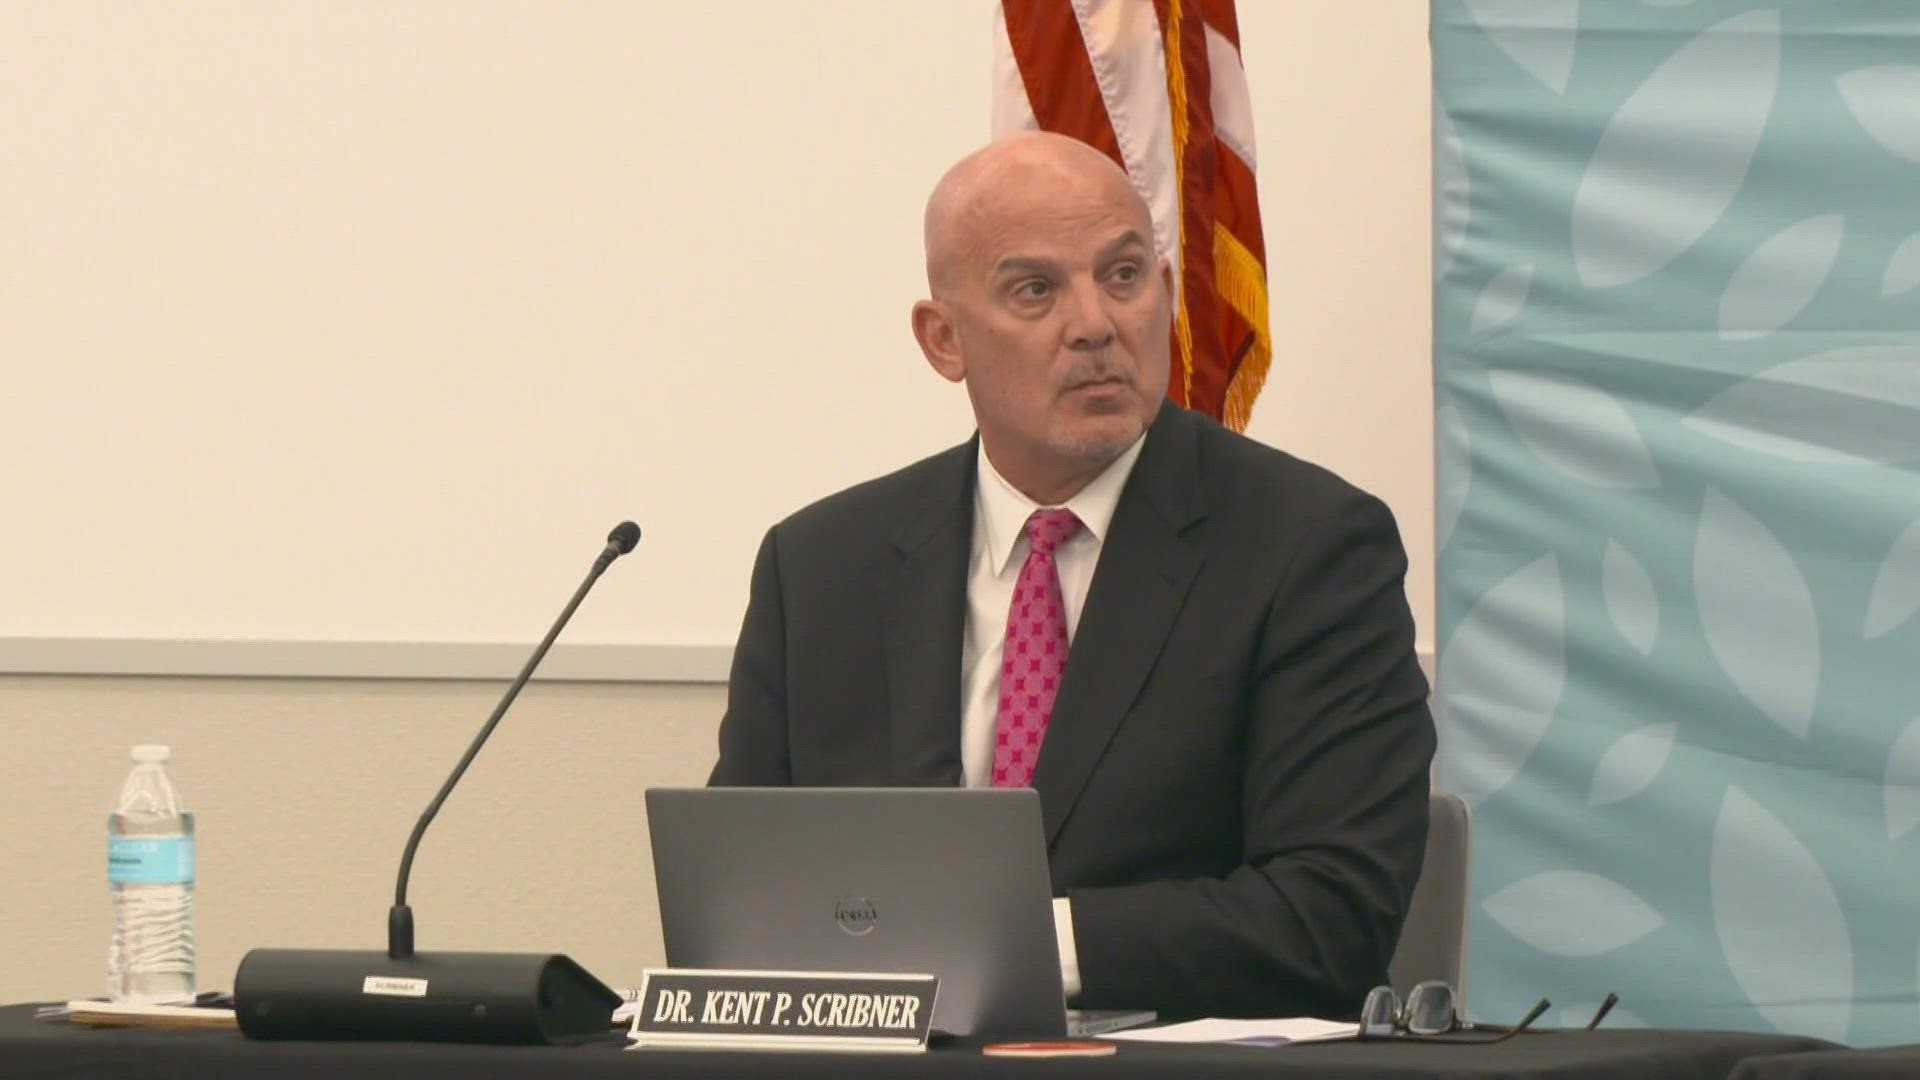 Dr. Scribner is among almost a dozen superintendents in the North Texas area calling it quits. The district is also looking to hire 200 more teachers.